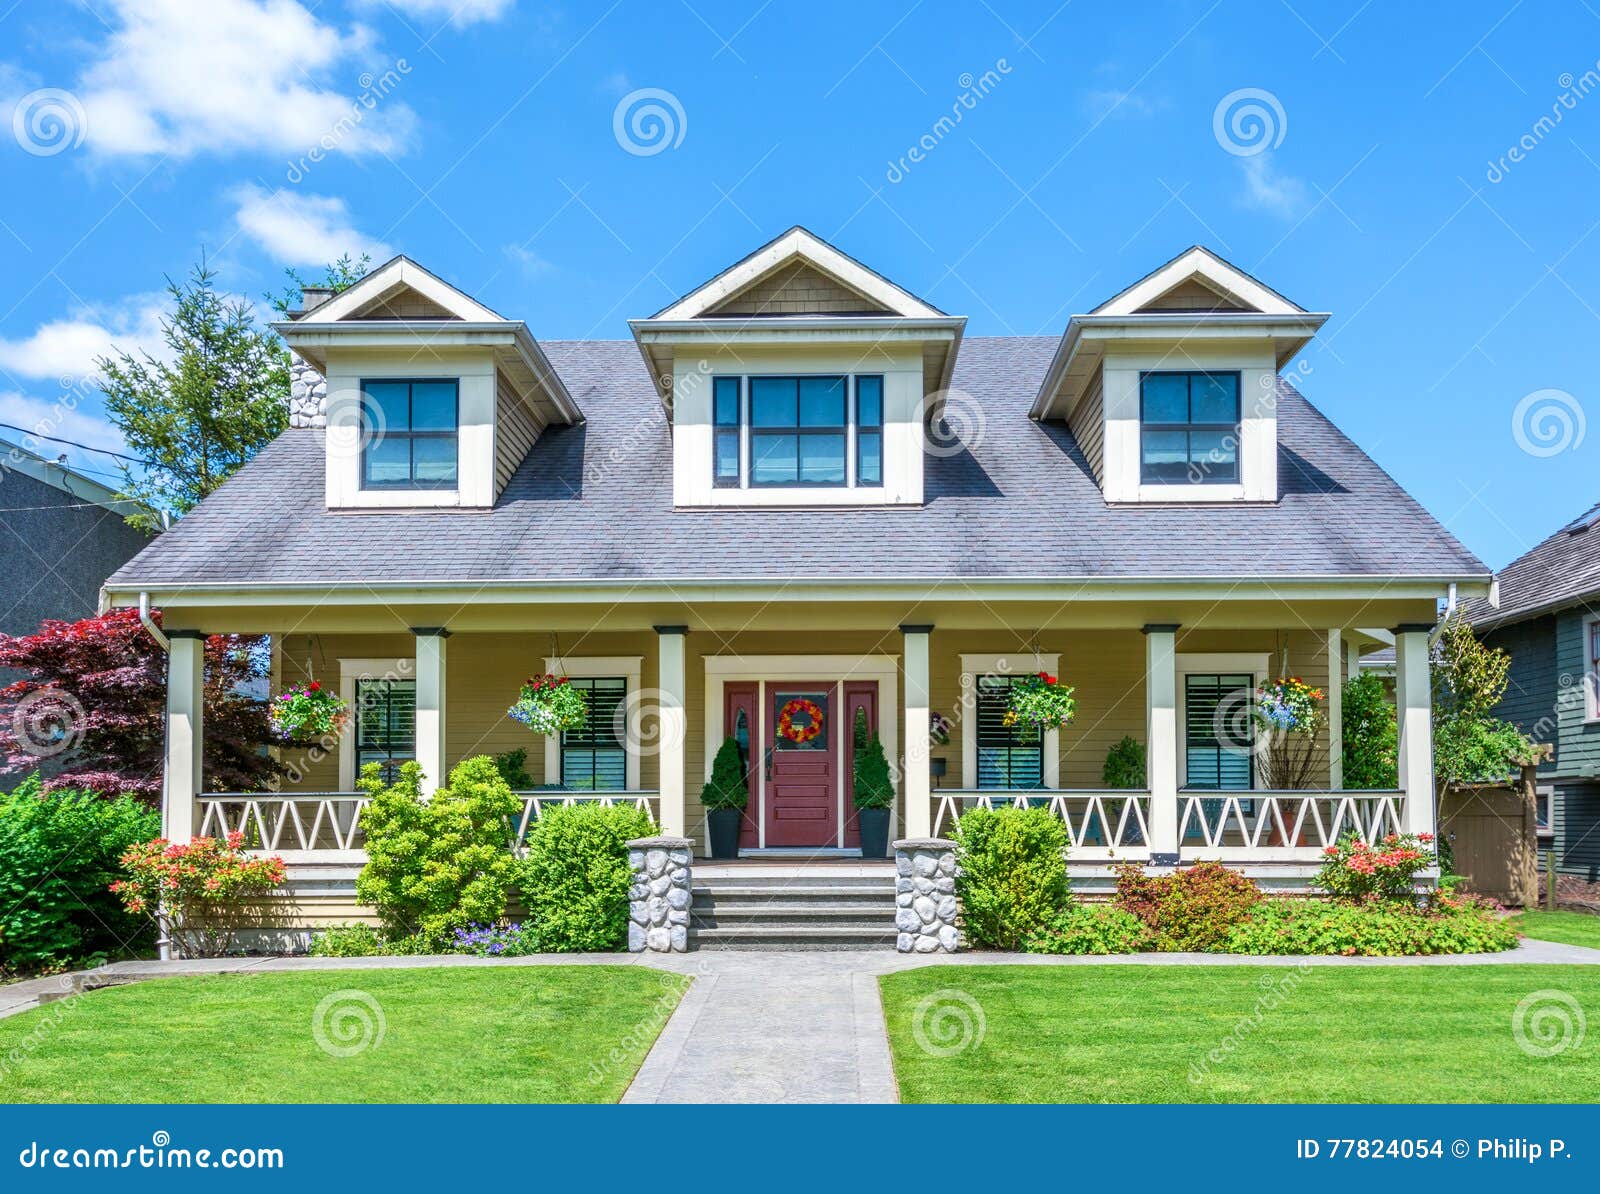 Luxury House with Beautiful Landscaping on a Sunny Day Stock Photo